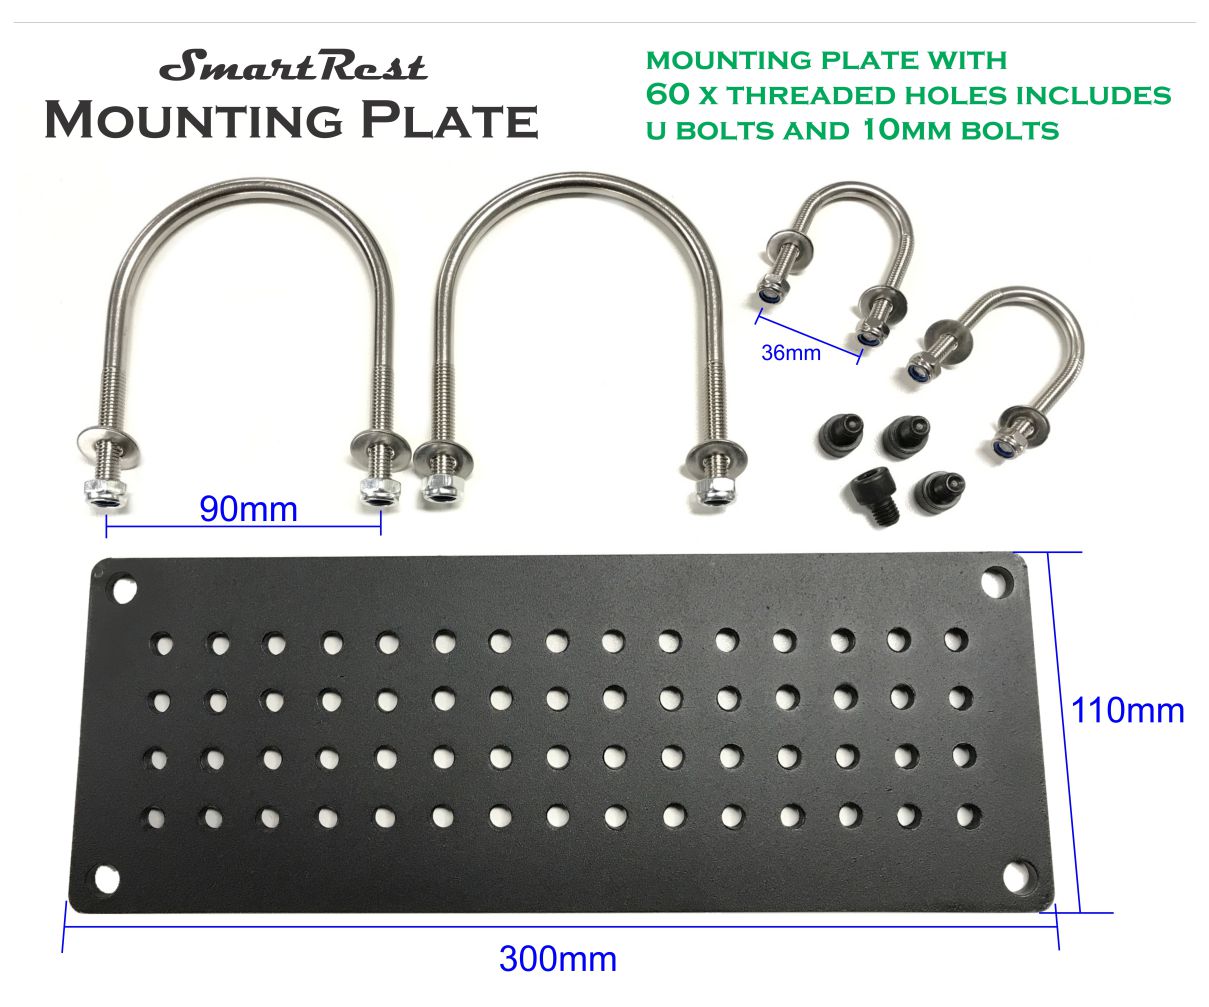 SmartRest Mounting Plate 